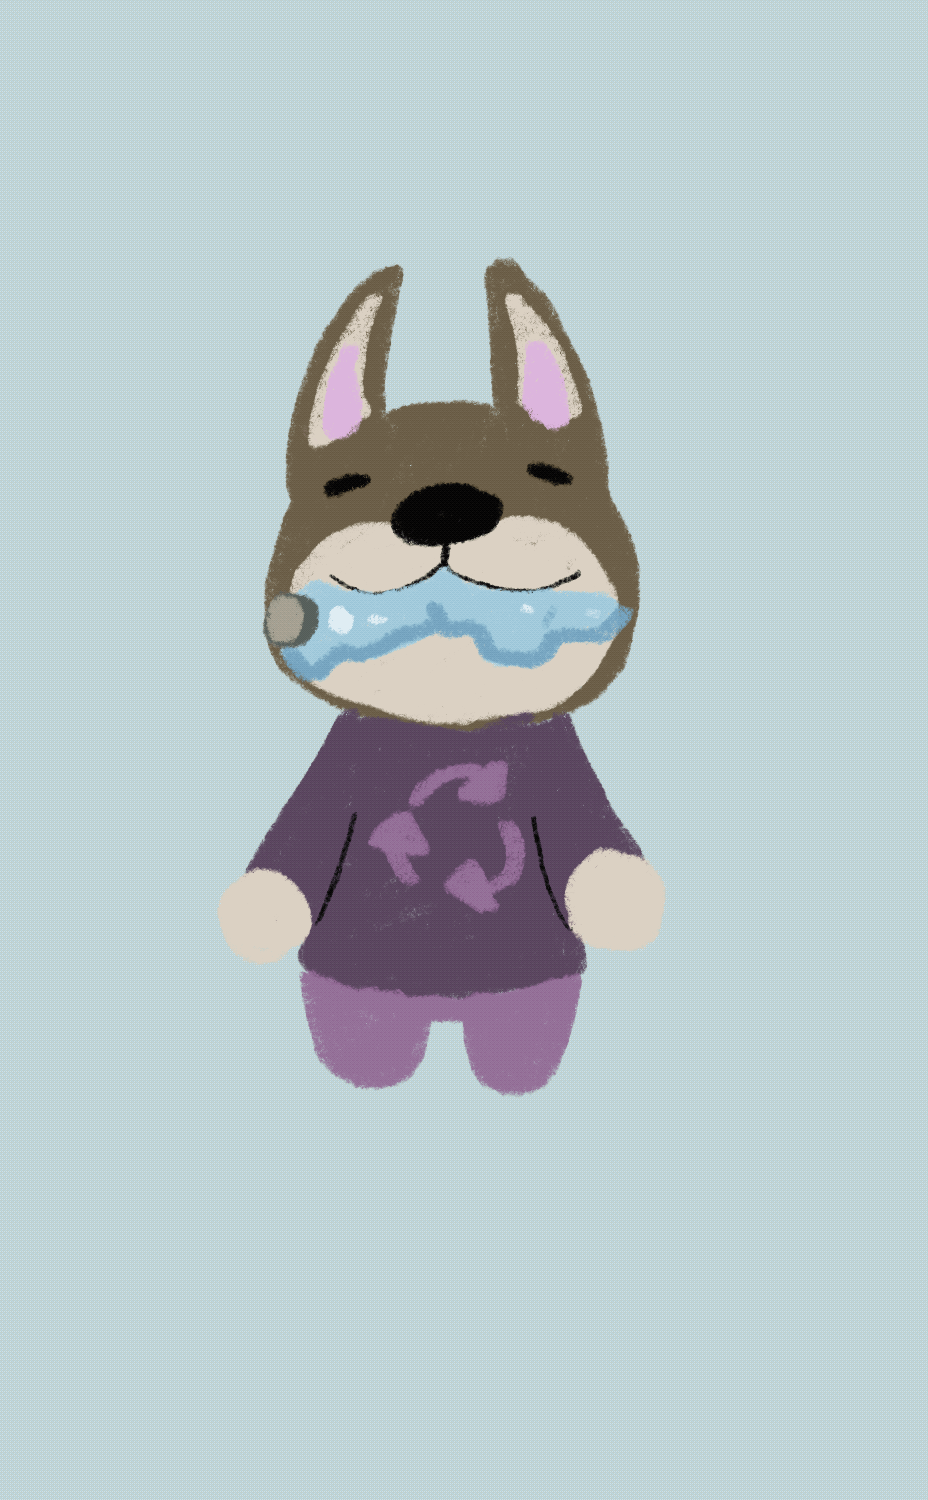 Dog with a purple shirt eating a plastic bottle